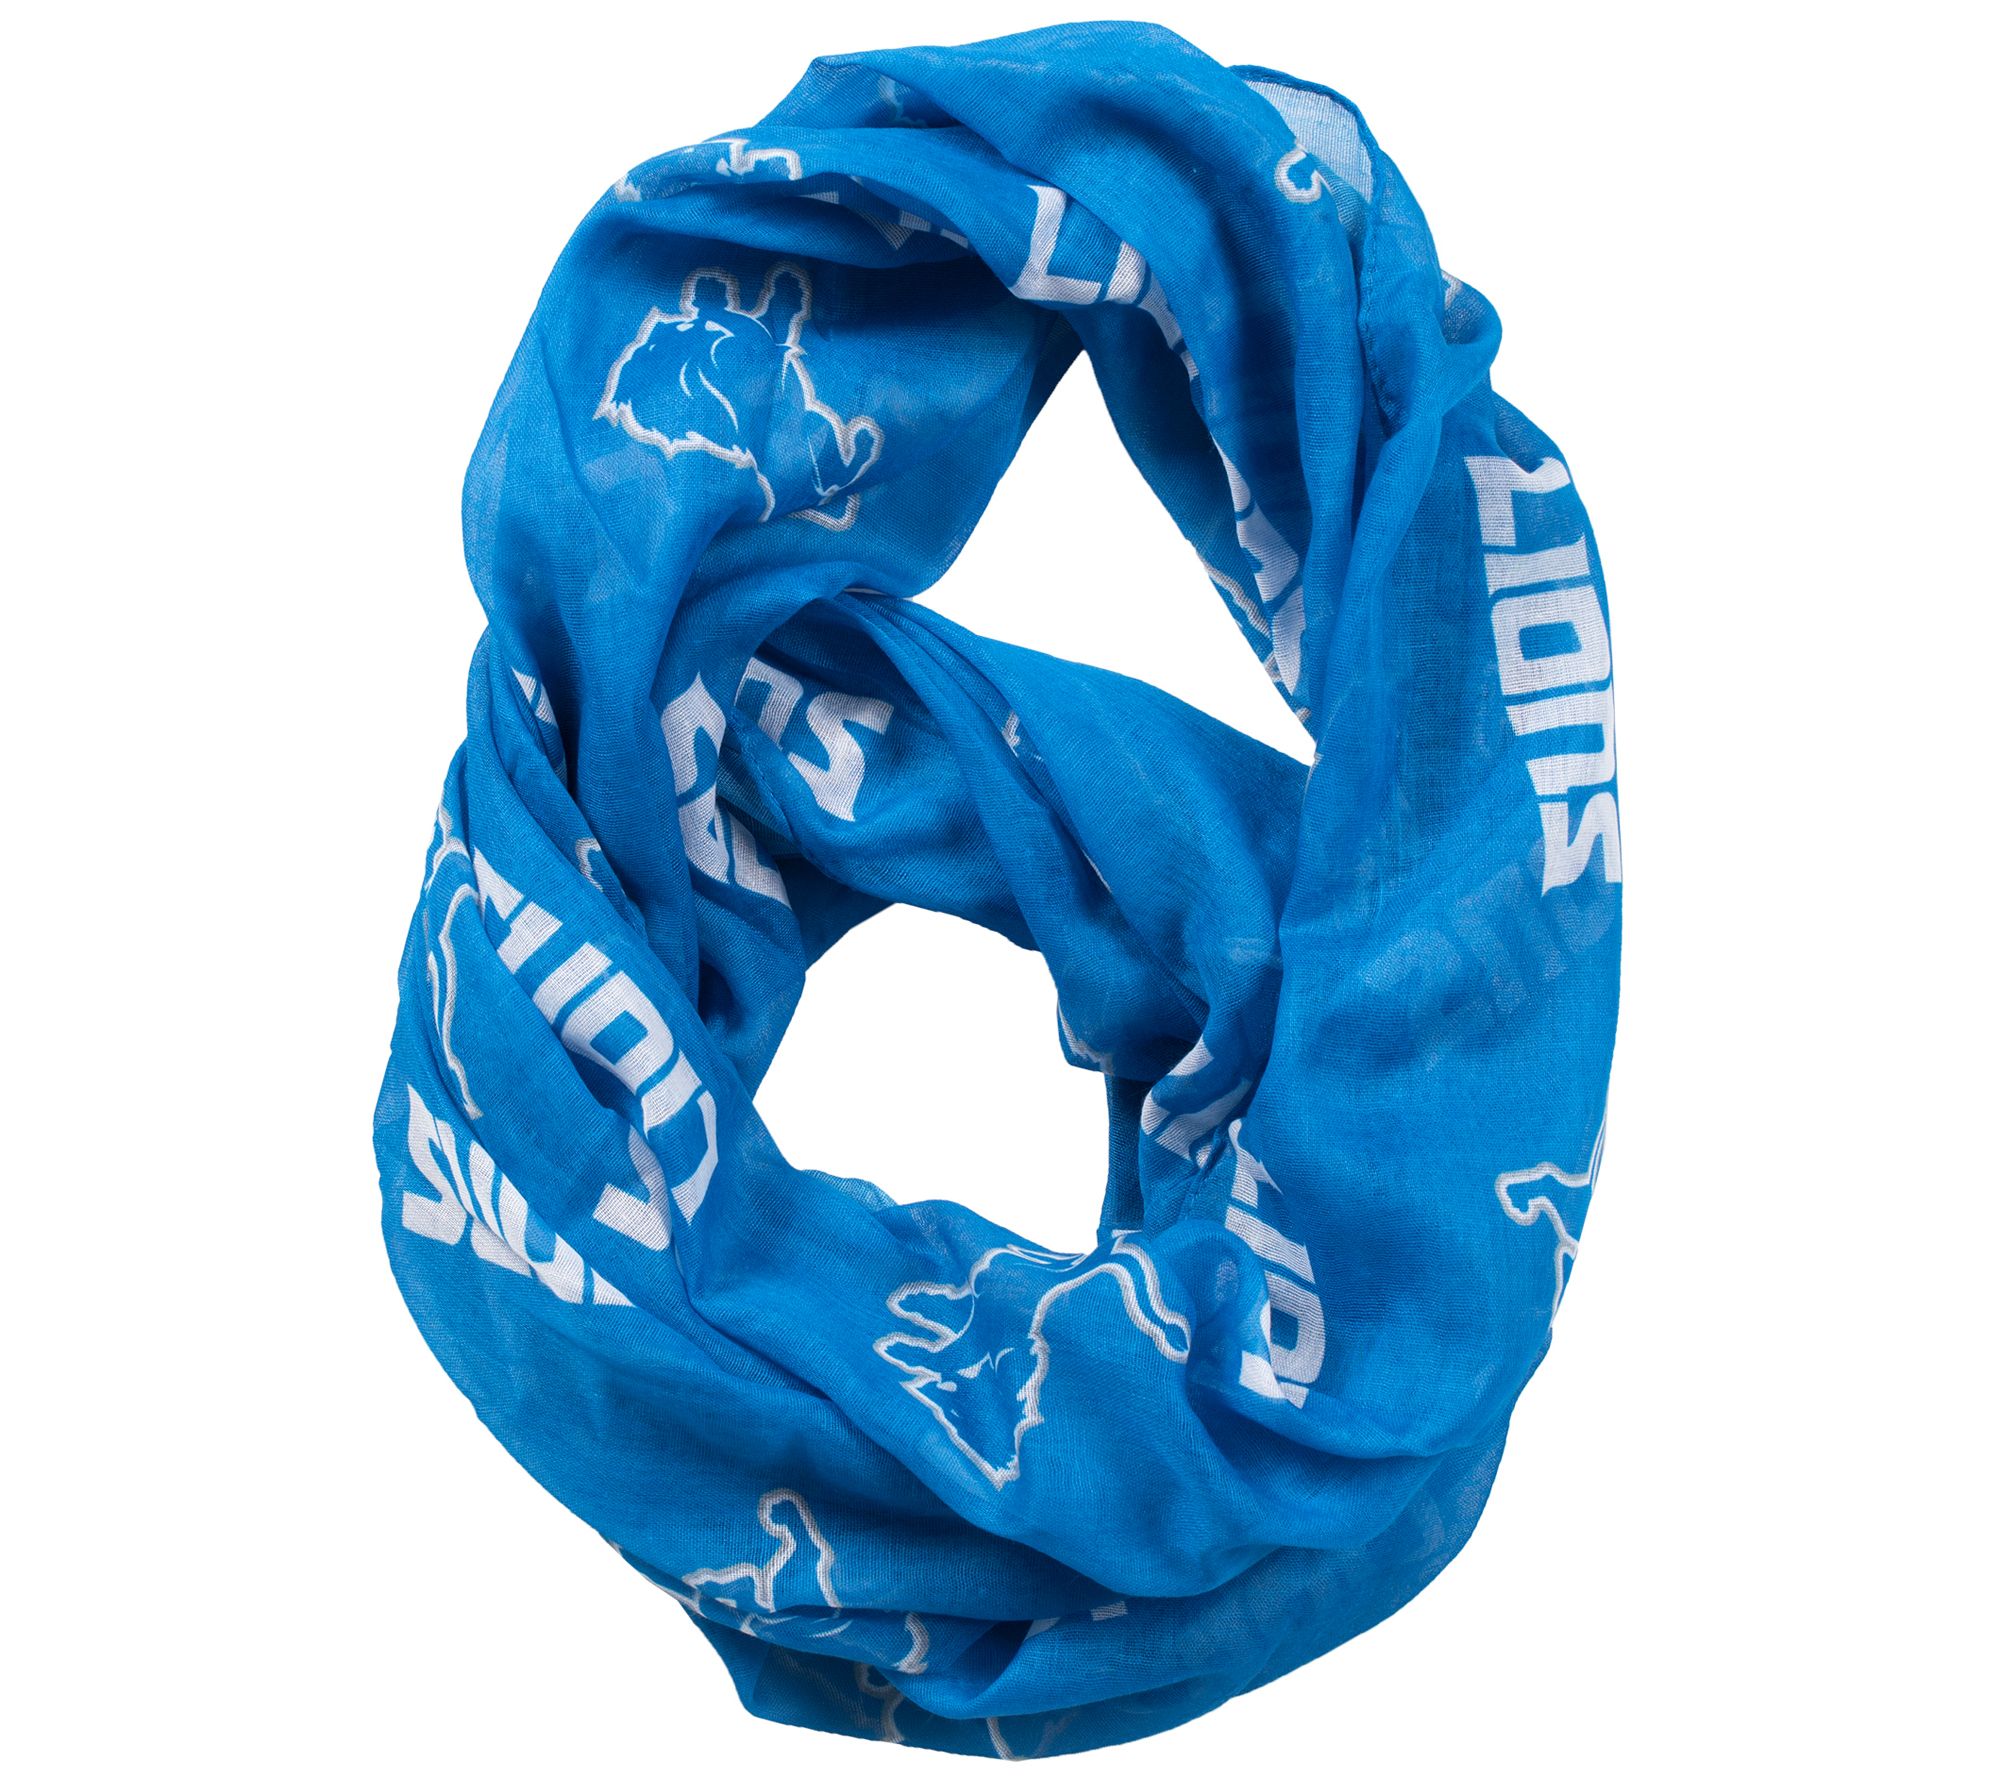 : Littlearth NFL womens Sheer Infinity Scarf : Sports & Outdoors